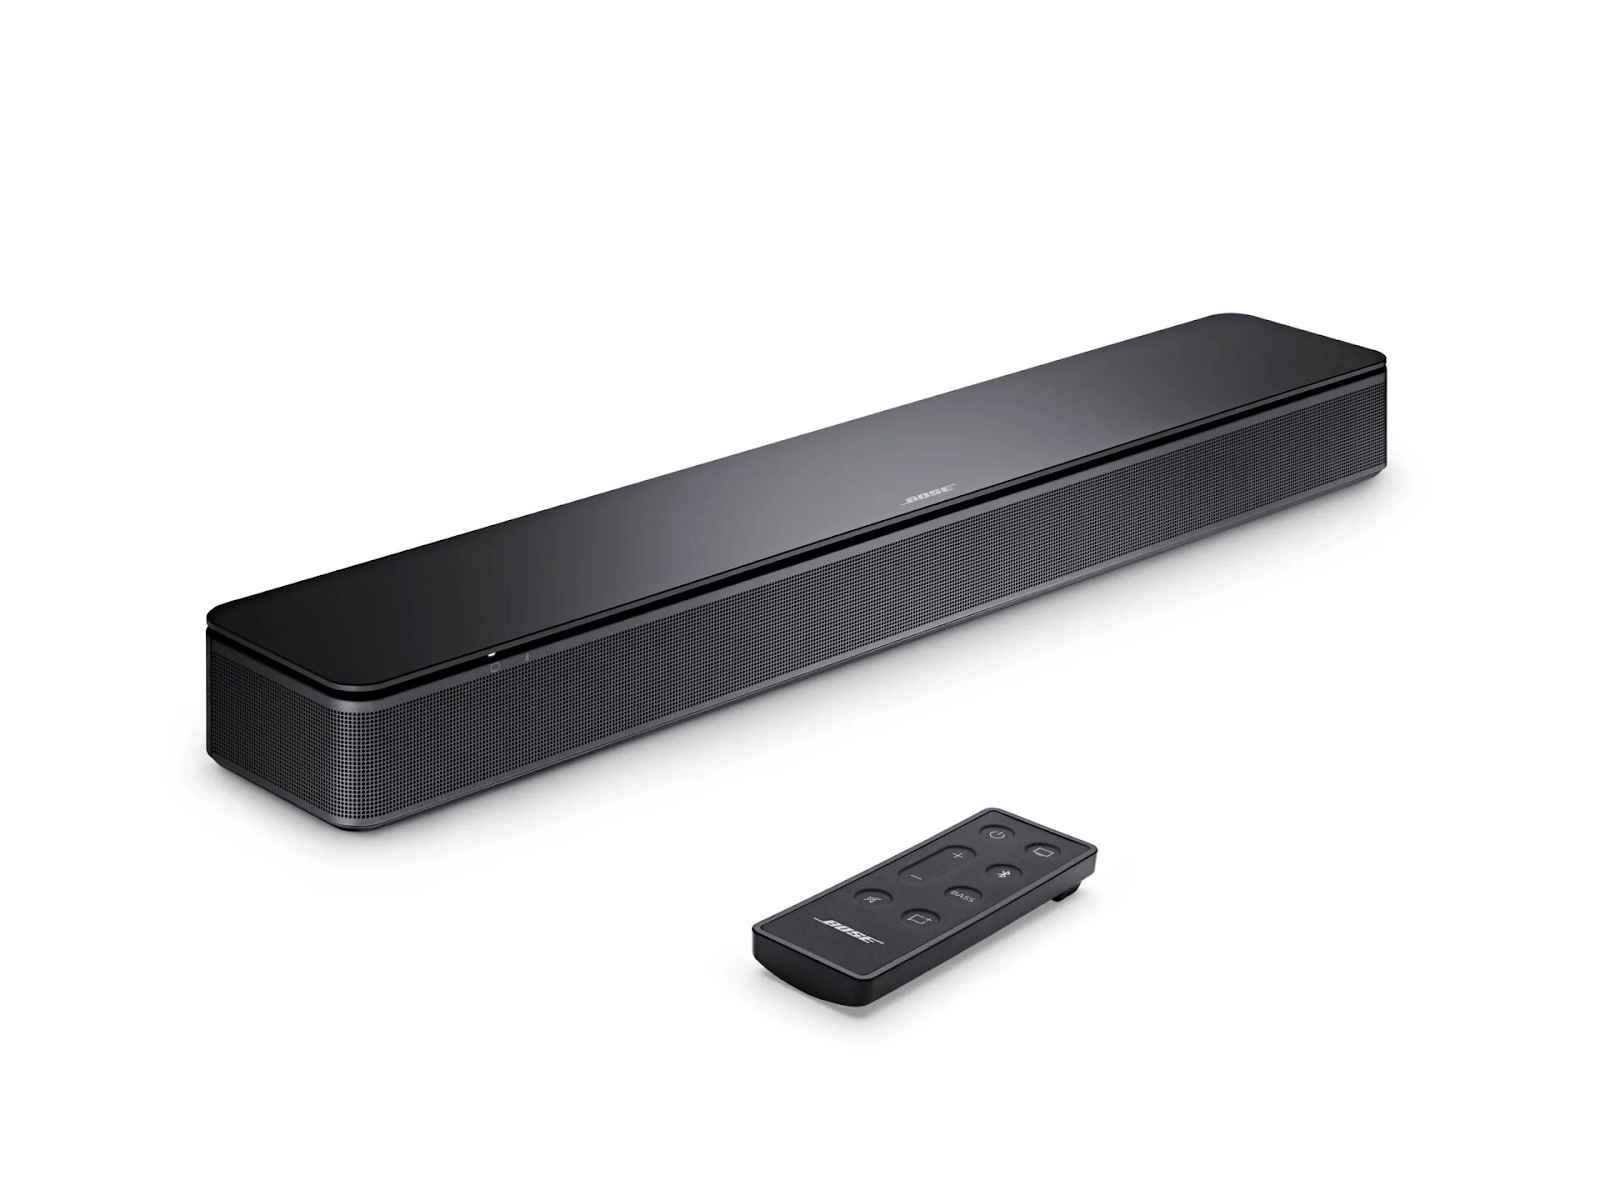 A soundbar is used to improve the audio quality of TVs